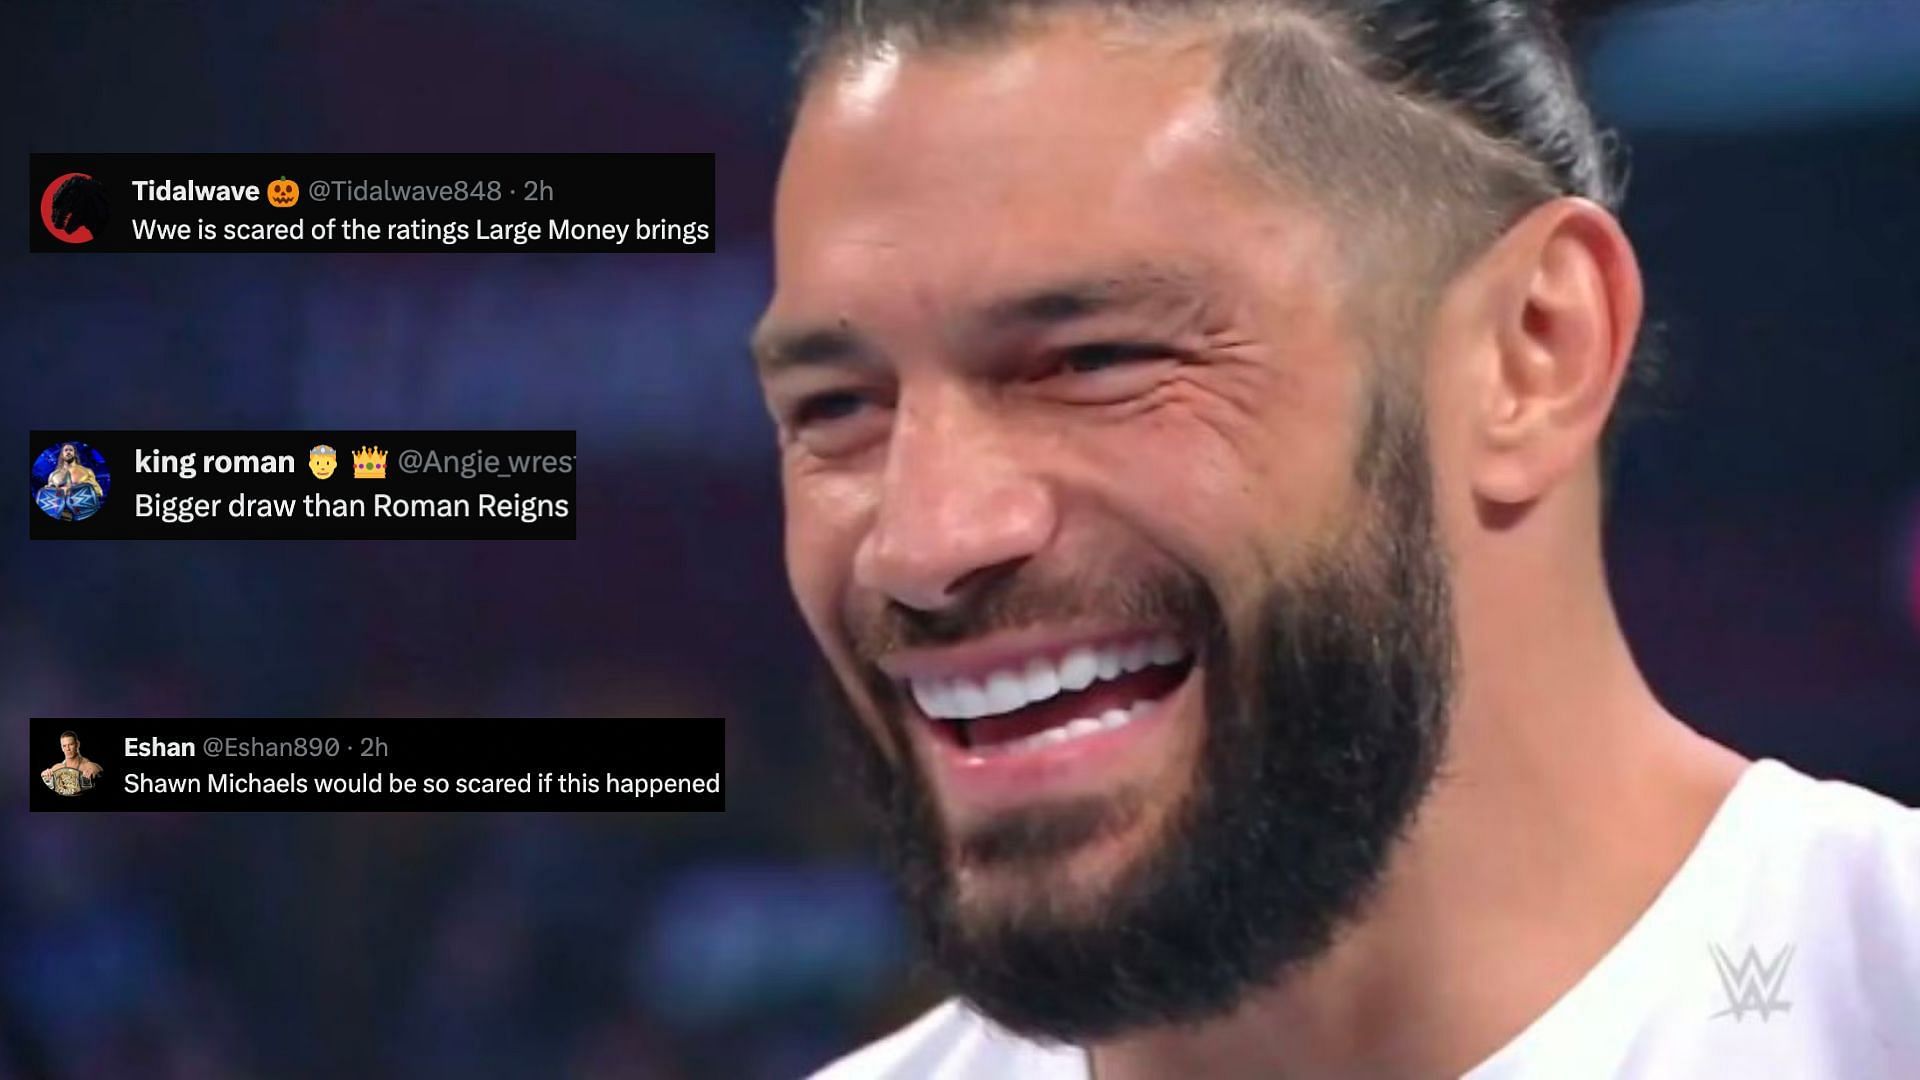 Roman Reigns is the biggest draw right now